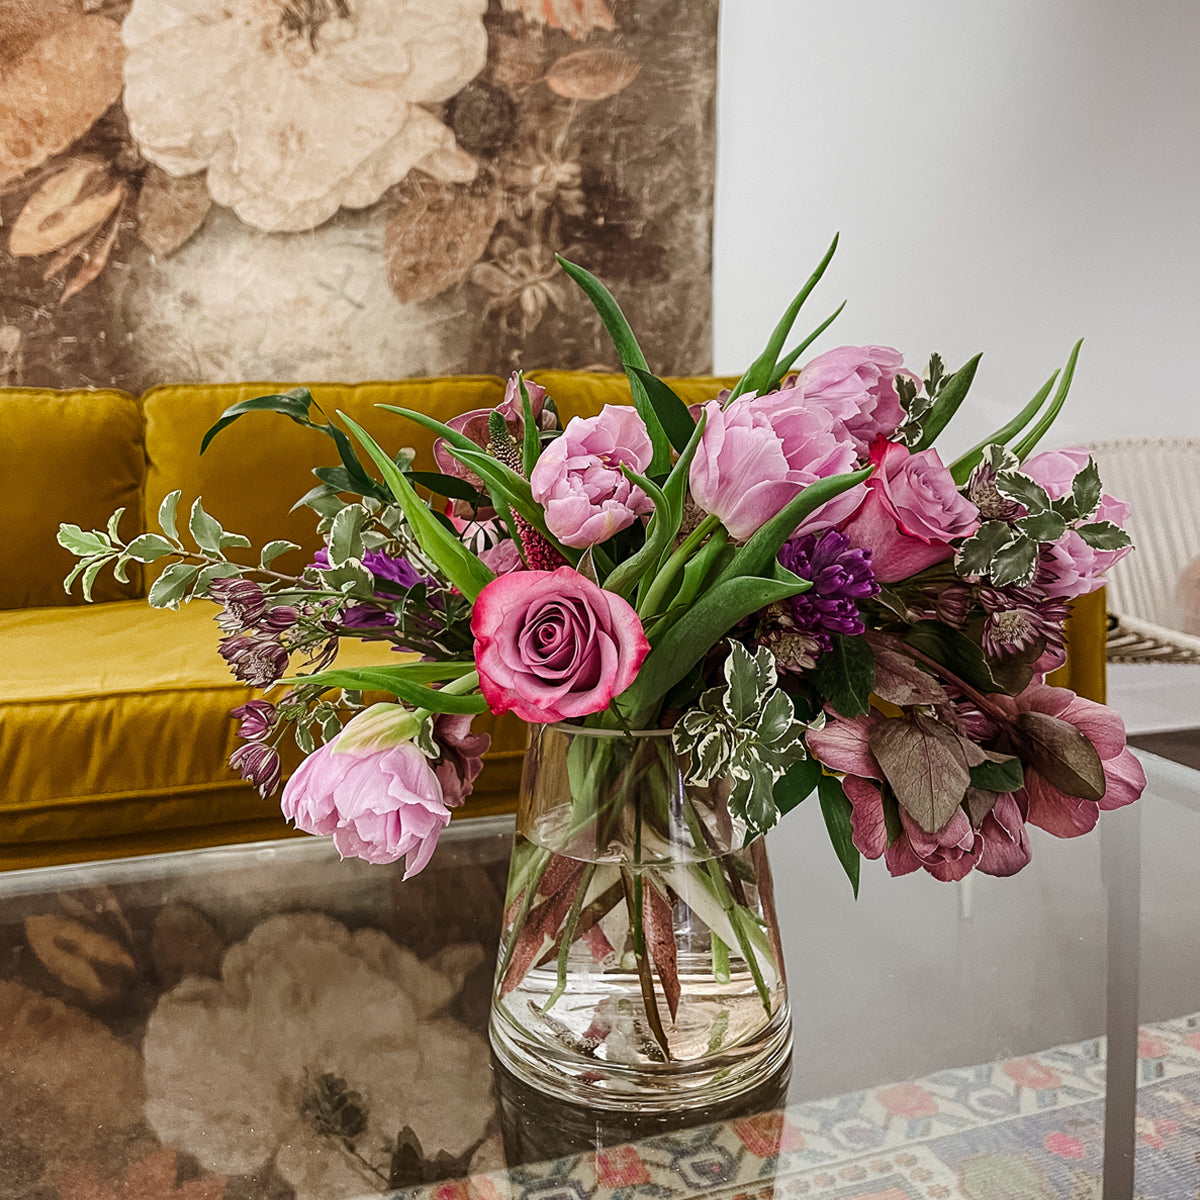 Spruce Flowers Audubon Arrangement A Spring floral celebration in purple with Hyacinth, Tulips and Roses created to celebrate 2023 International Women's Day on March 8th. Spruce will donate $15 from each arrangement to the Women's Foundation of Minnesota .